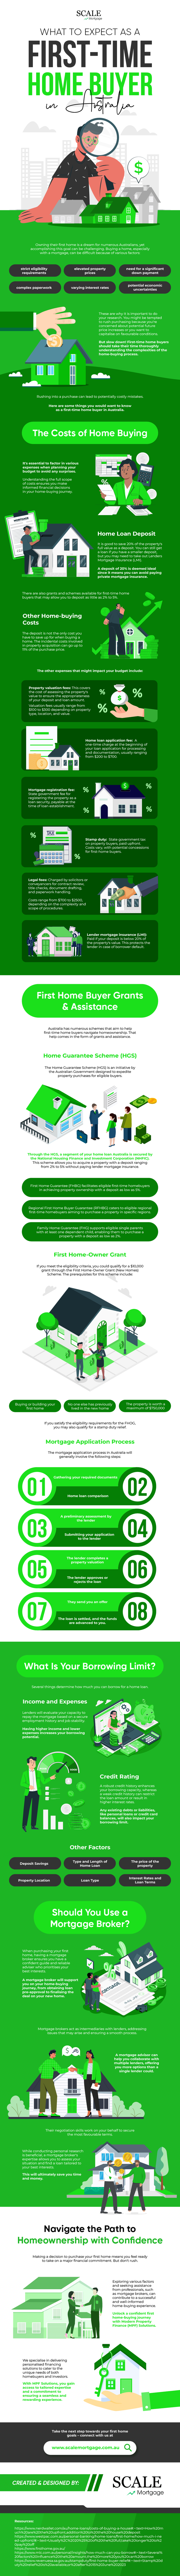 What to Expect as a First-Time Home Buyer in Australia Infographic Image